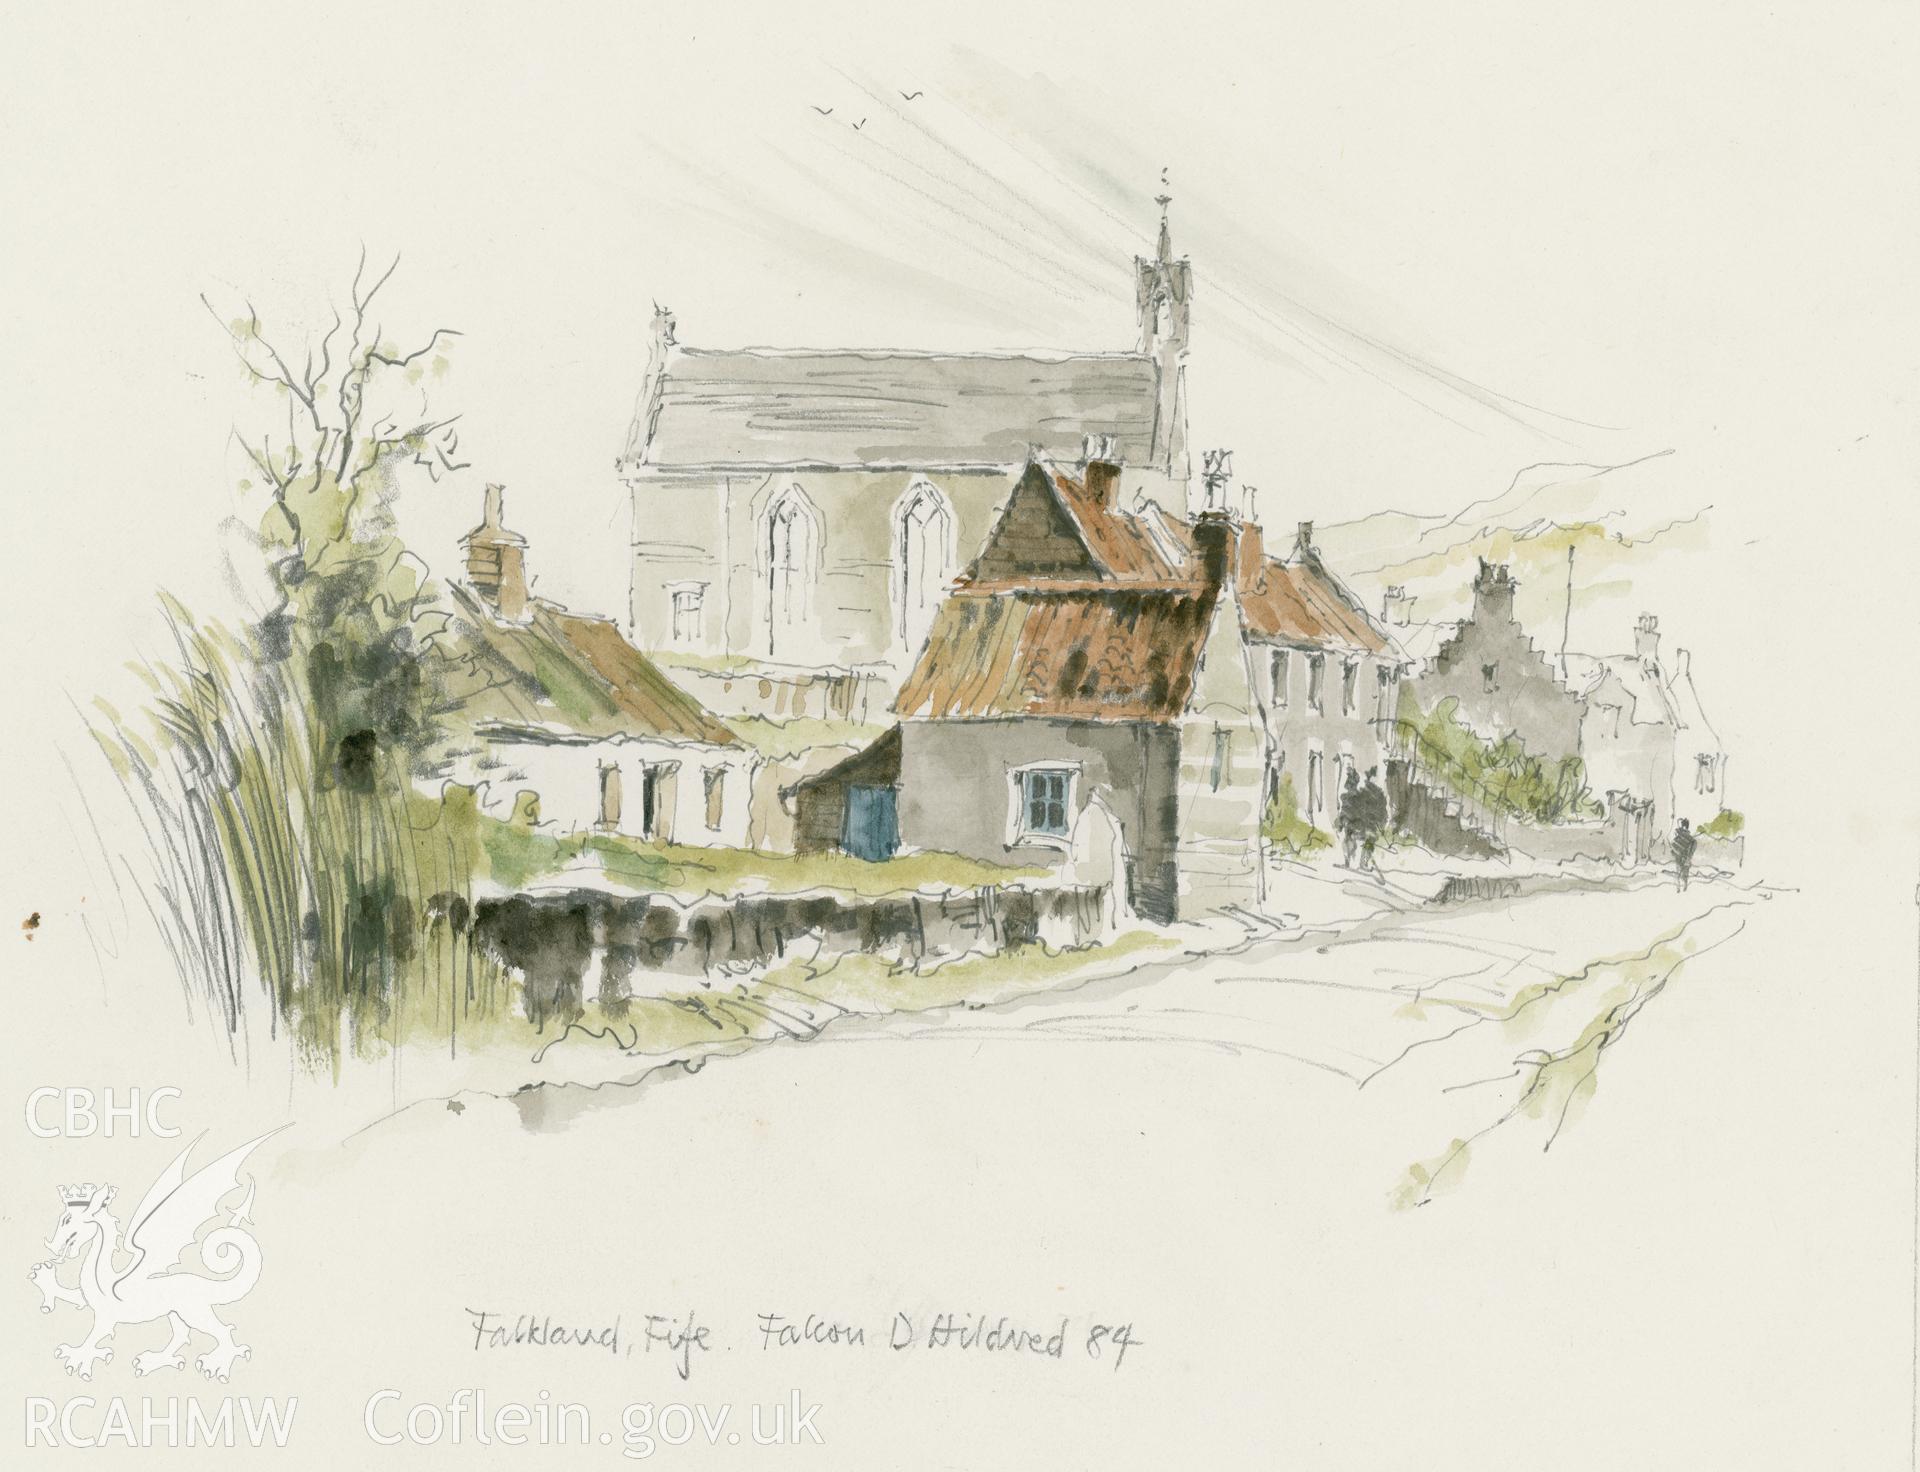 Falkland with Kirk, Scotland: (pencil and watercolour) site sketch.